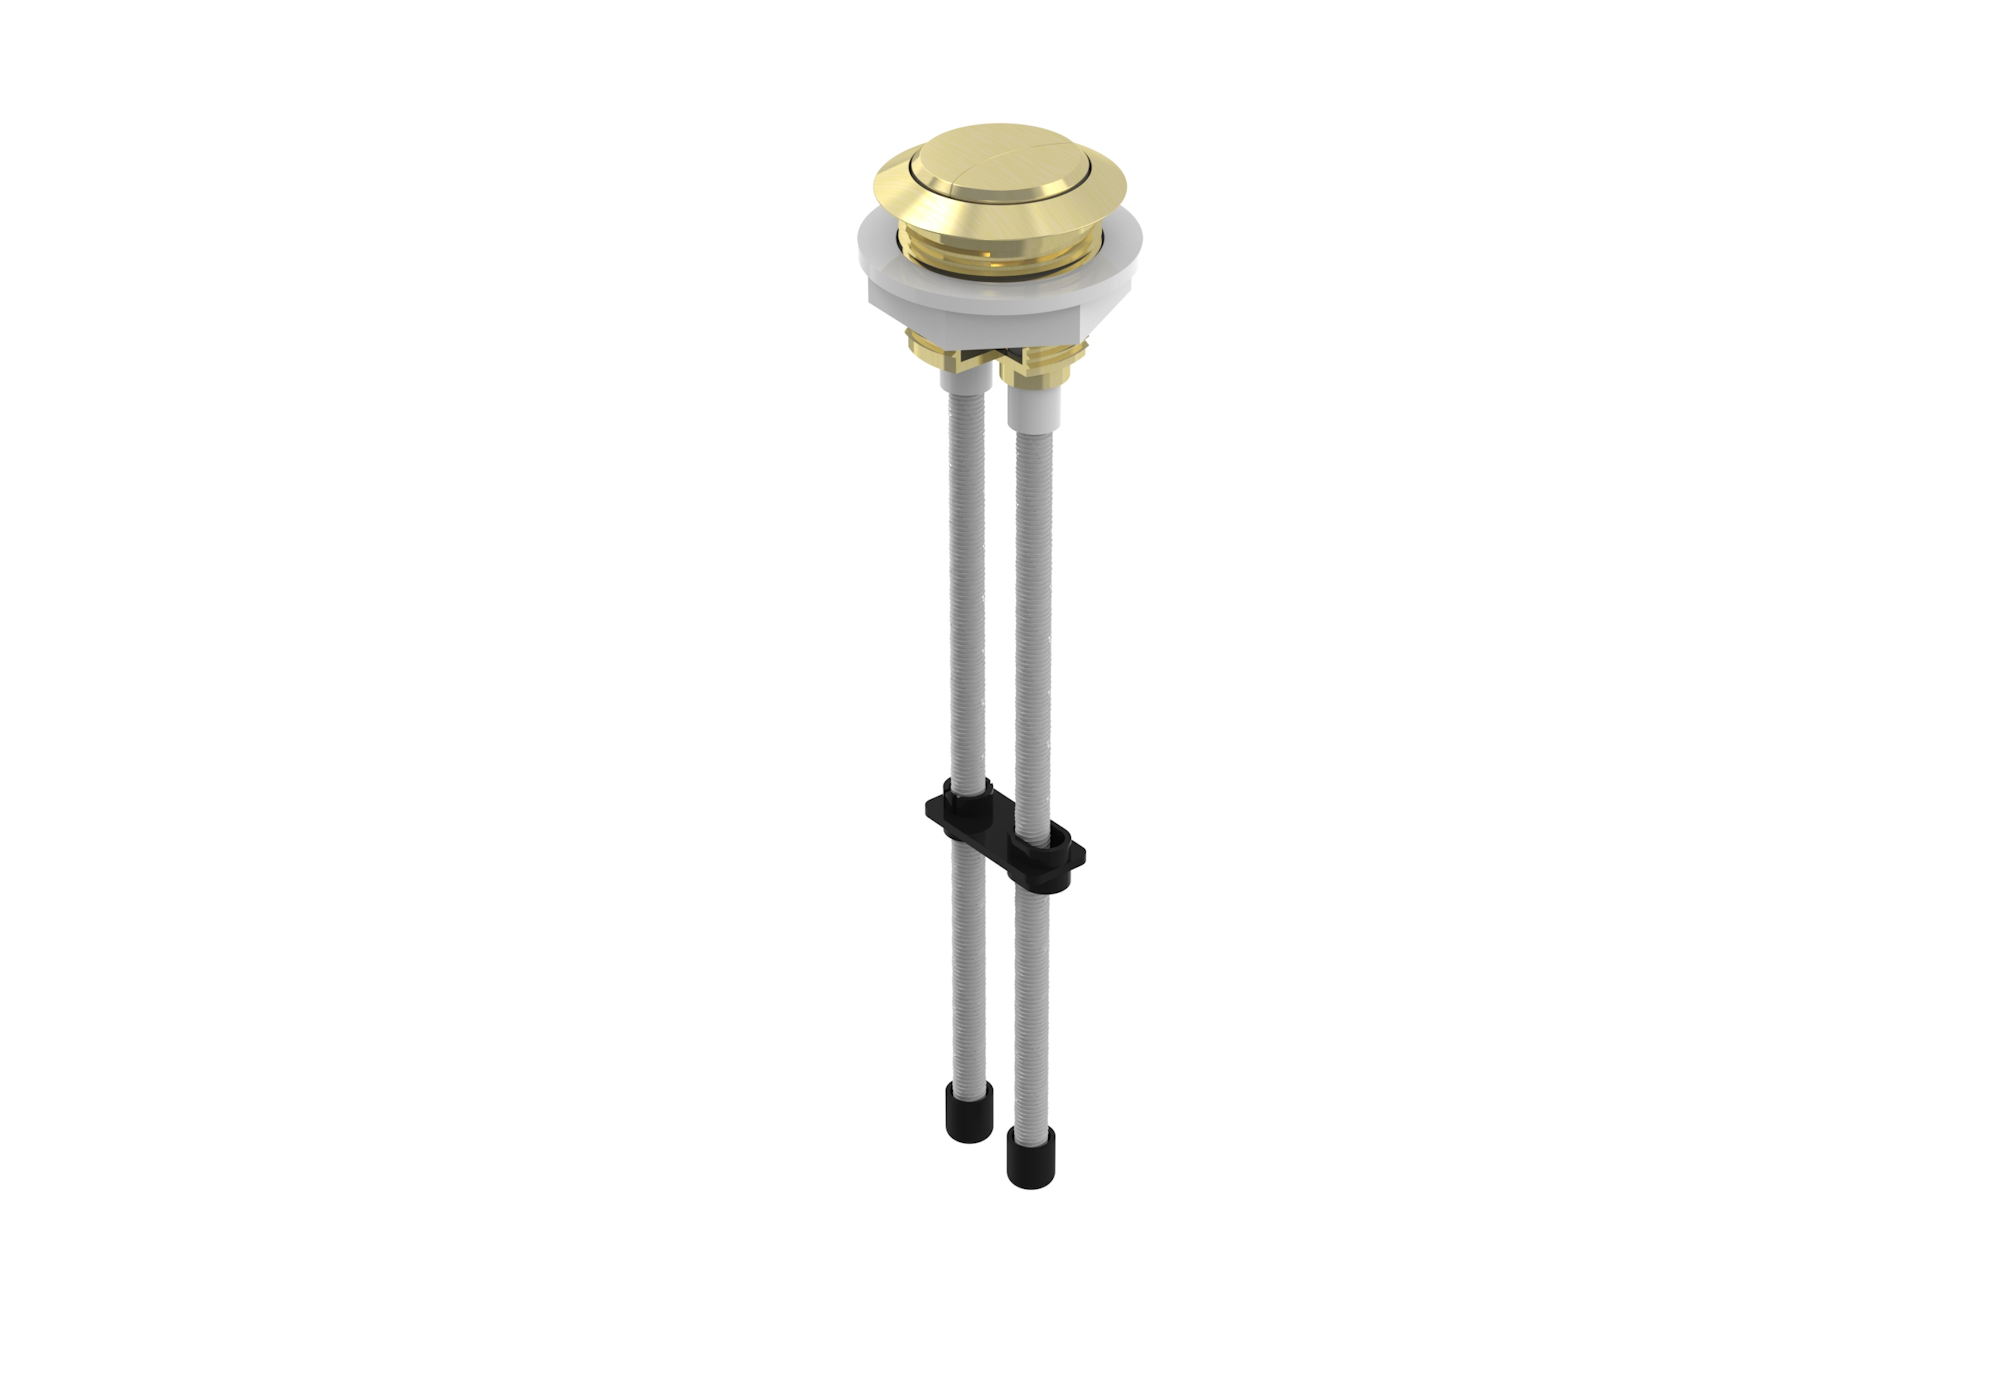 Flush button - 2 Rods - Brushed Brass (Compatible with AIR, MATTEO & UNI)